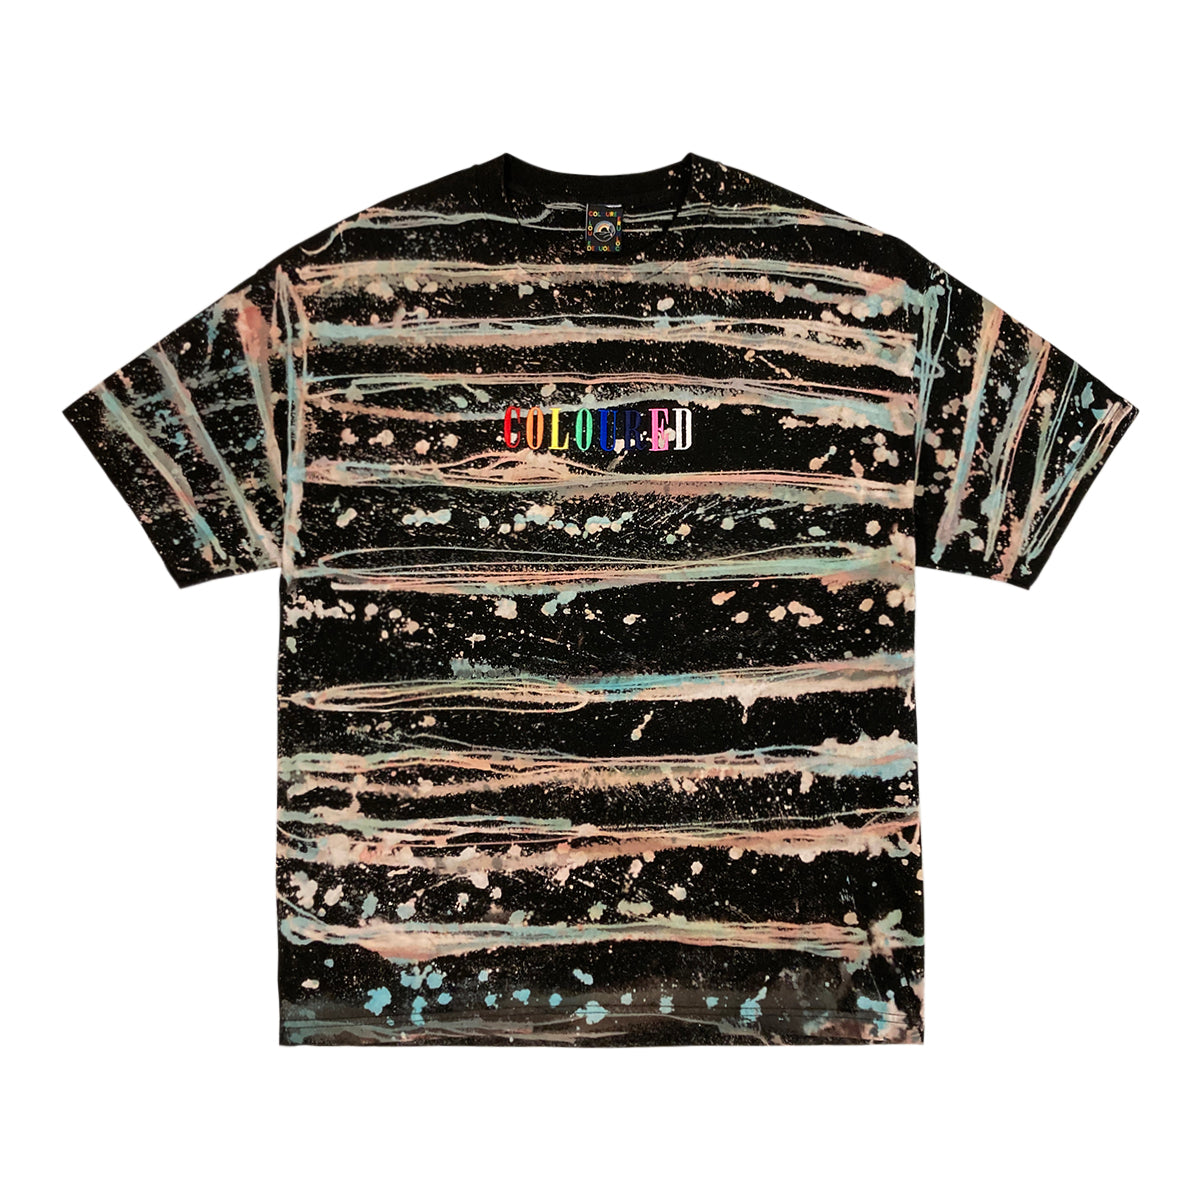 An image of a black t-shirt with bleached and dyed stripes and dots and "COLOURED" embroidered in rainbow colors.